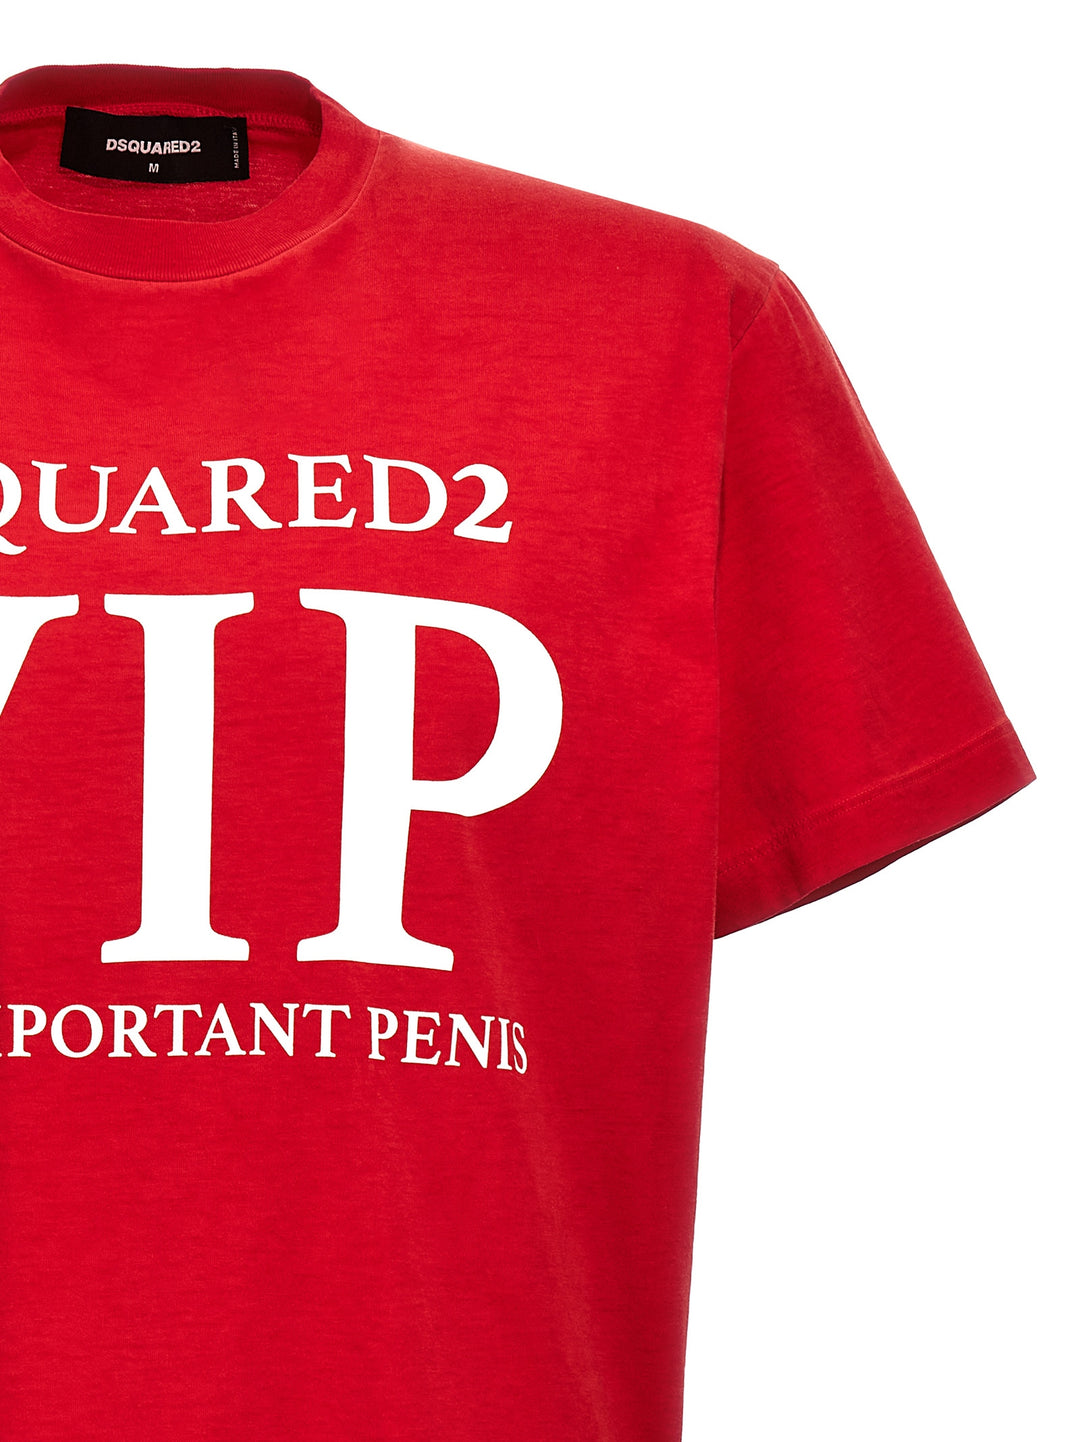 Vip T Shirt Rosso